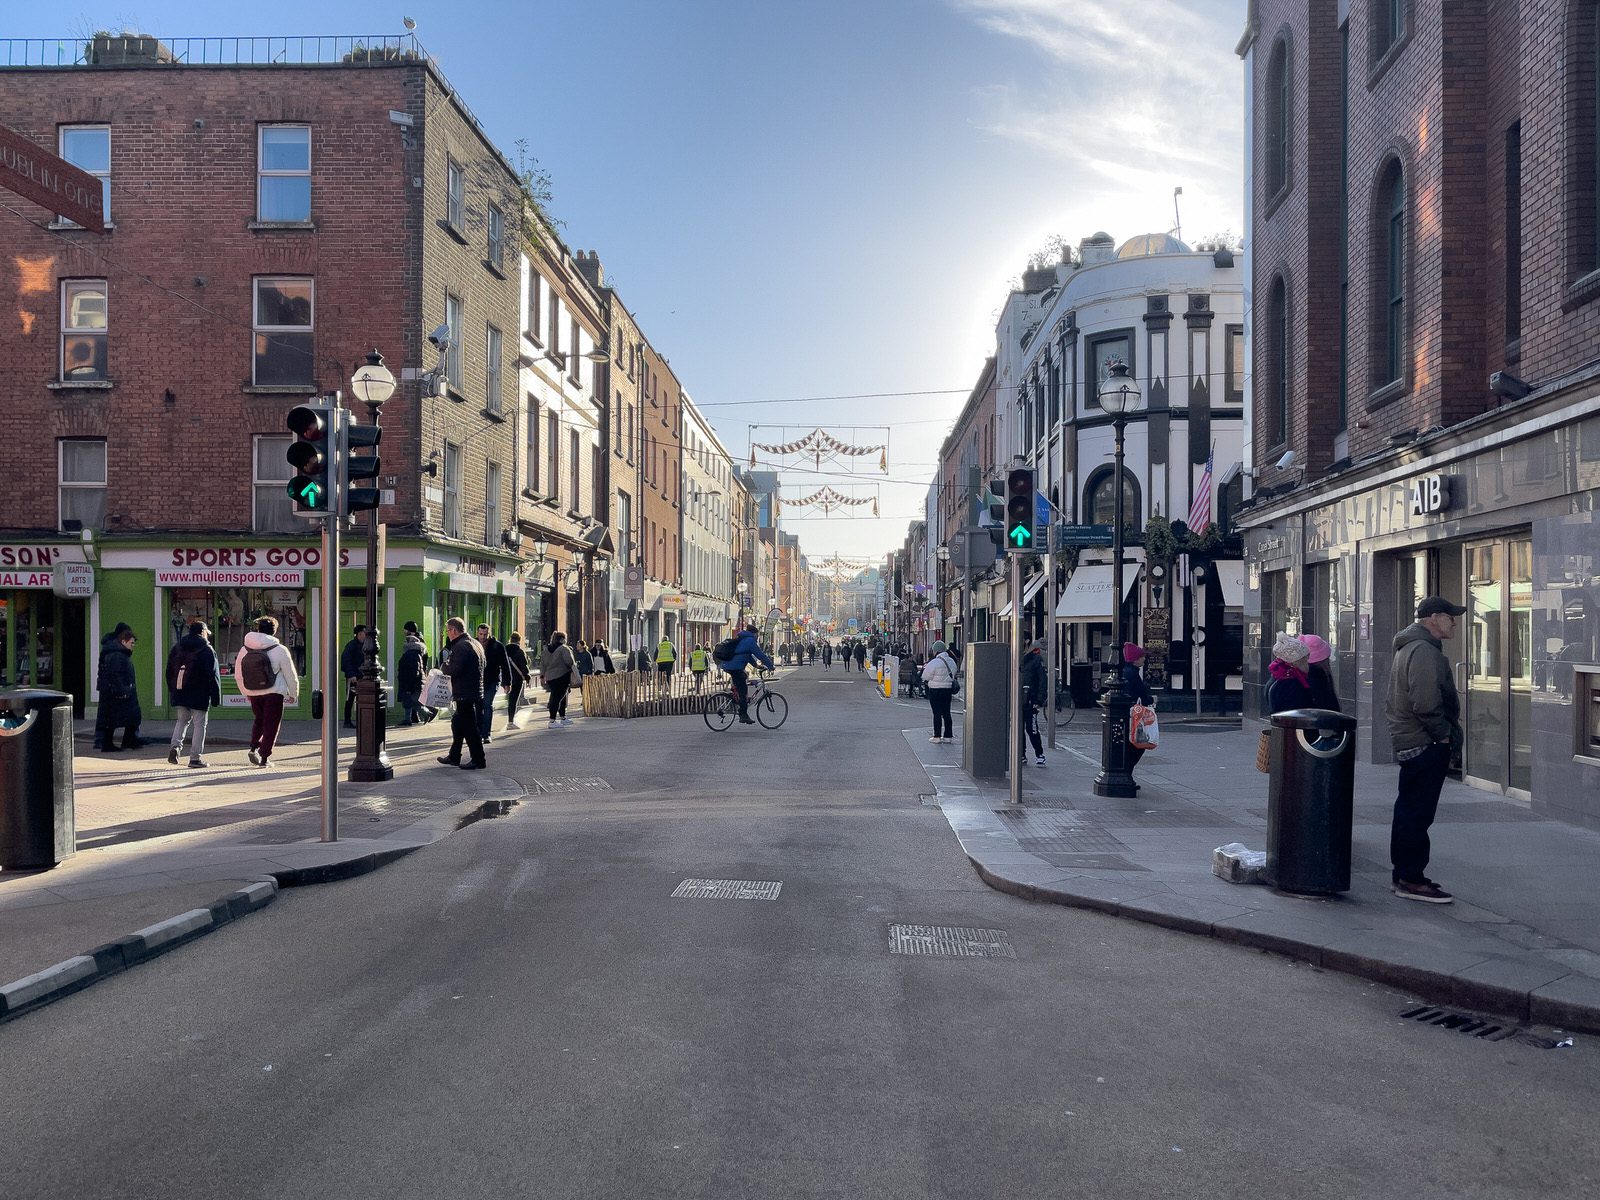 THE NEW STREET FURNITURE AND THE CHRISTMAS TREE [HAVE ARRIVED IN CAPEL STREET]-225861-1